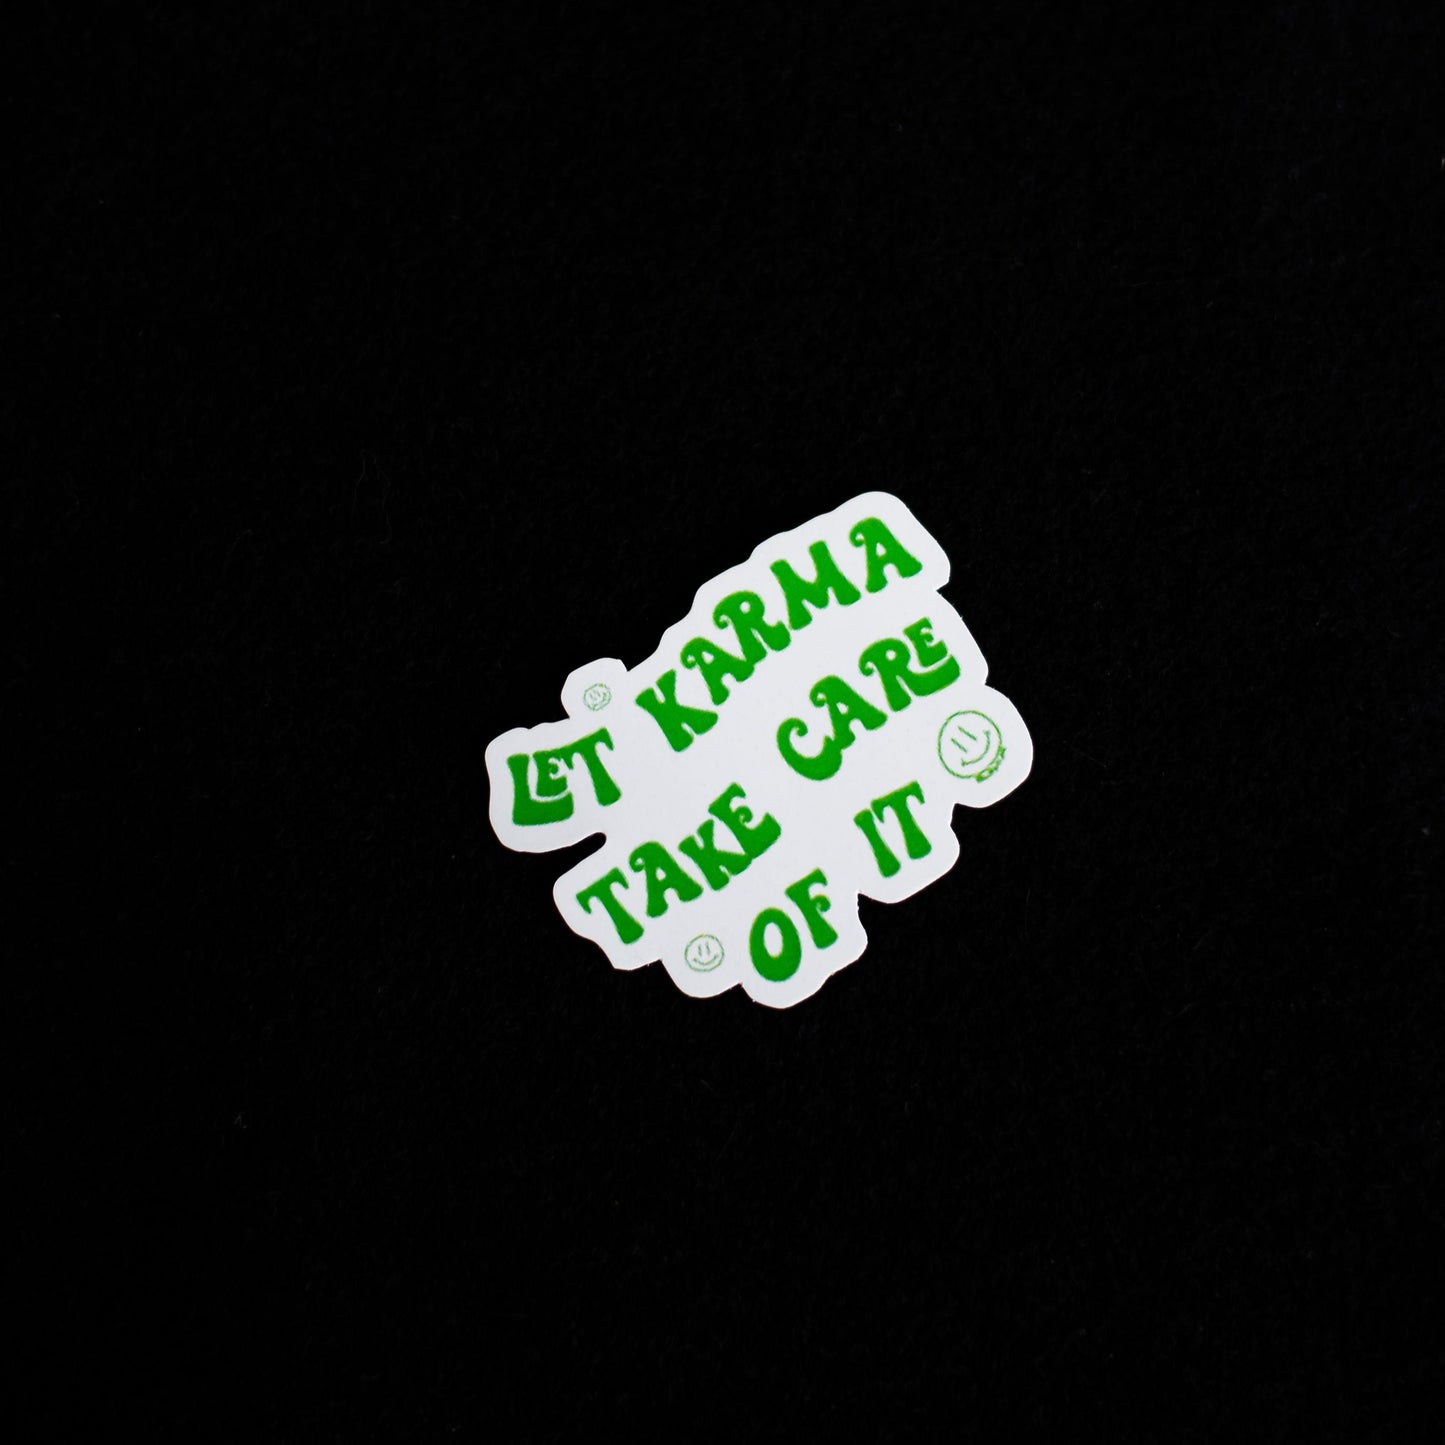 "Let karma take care of it" stickers